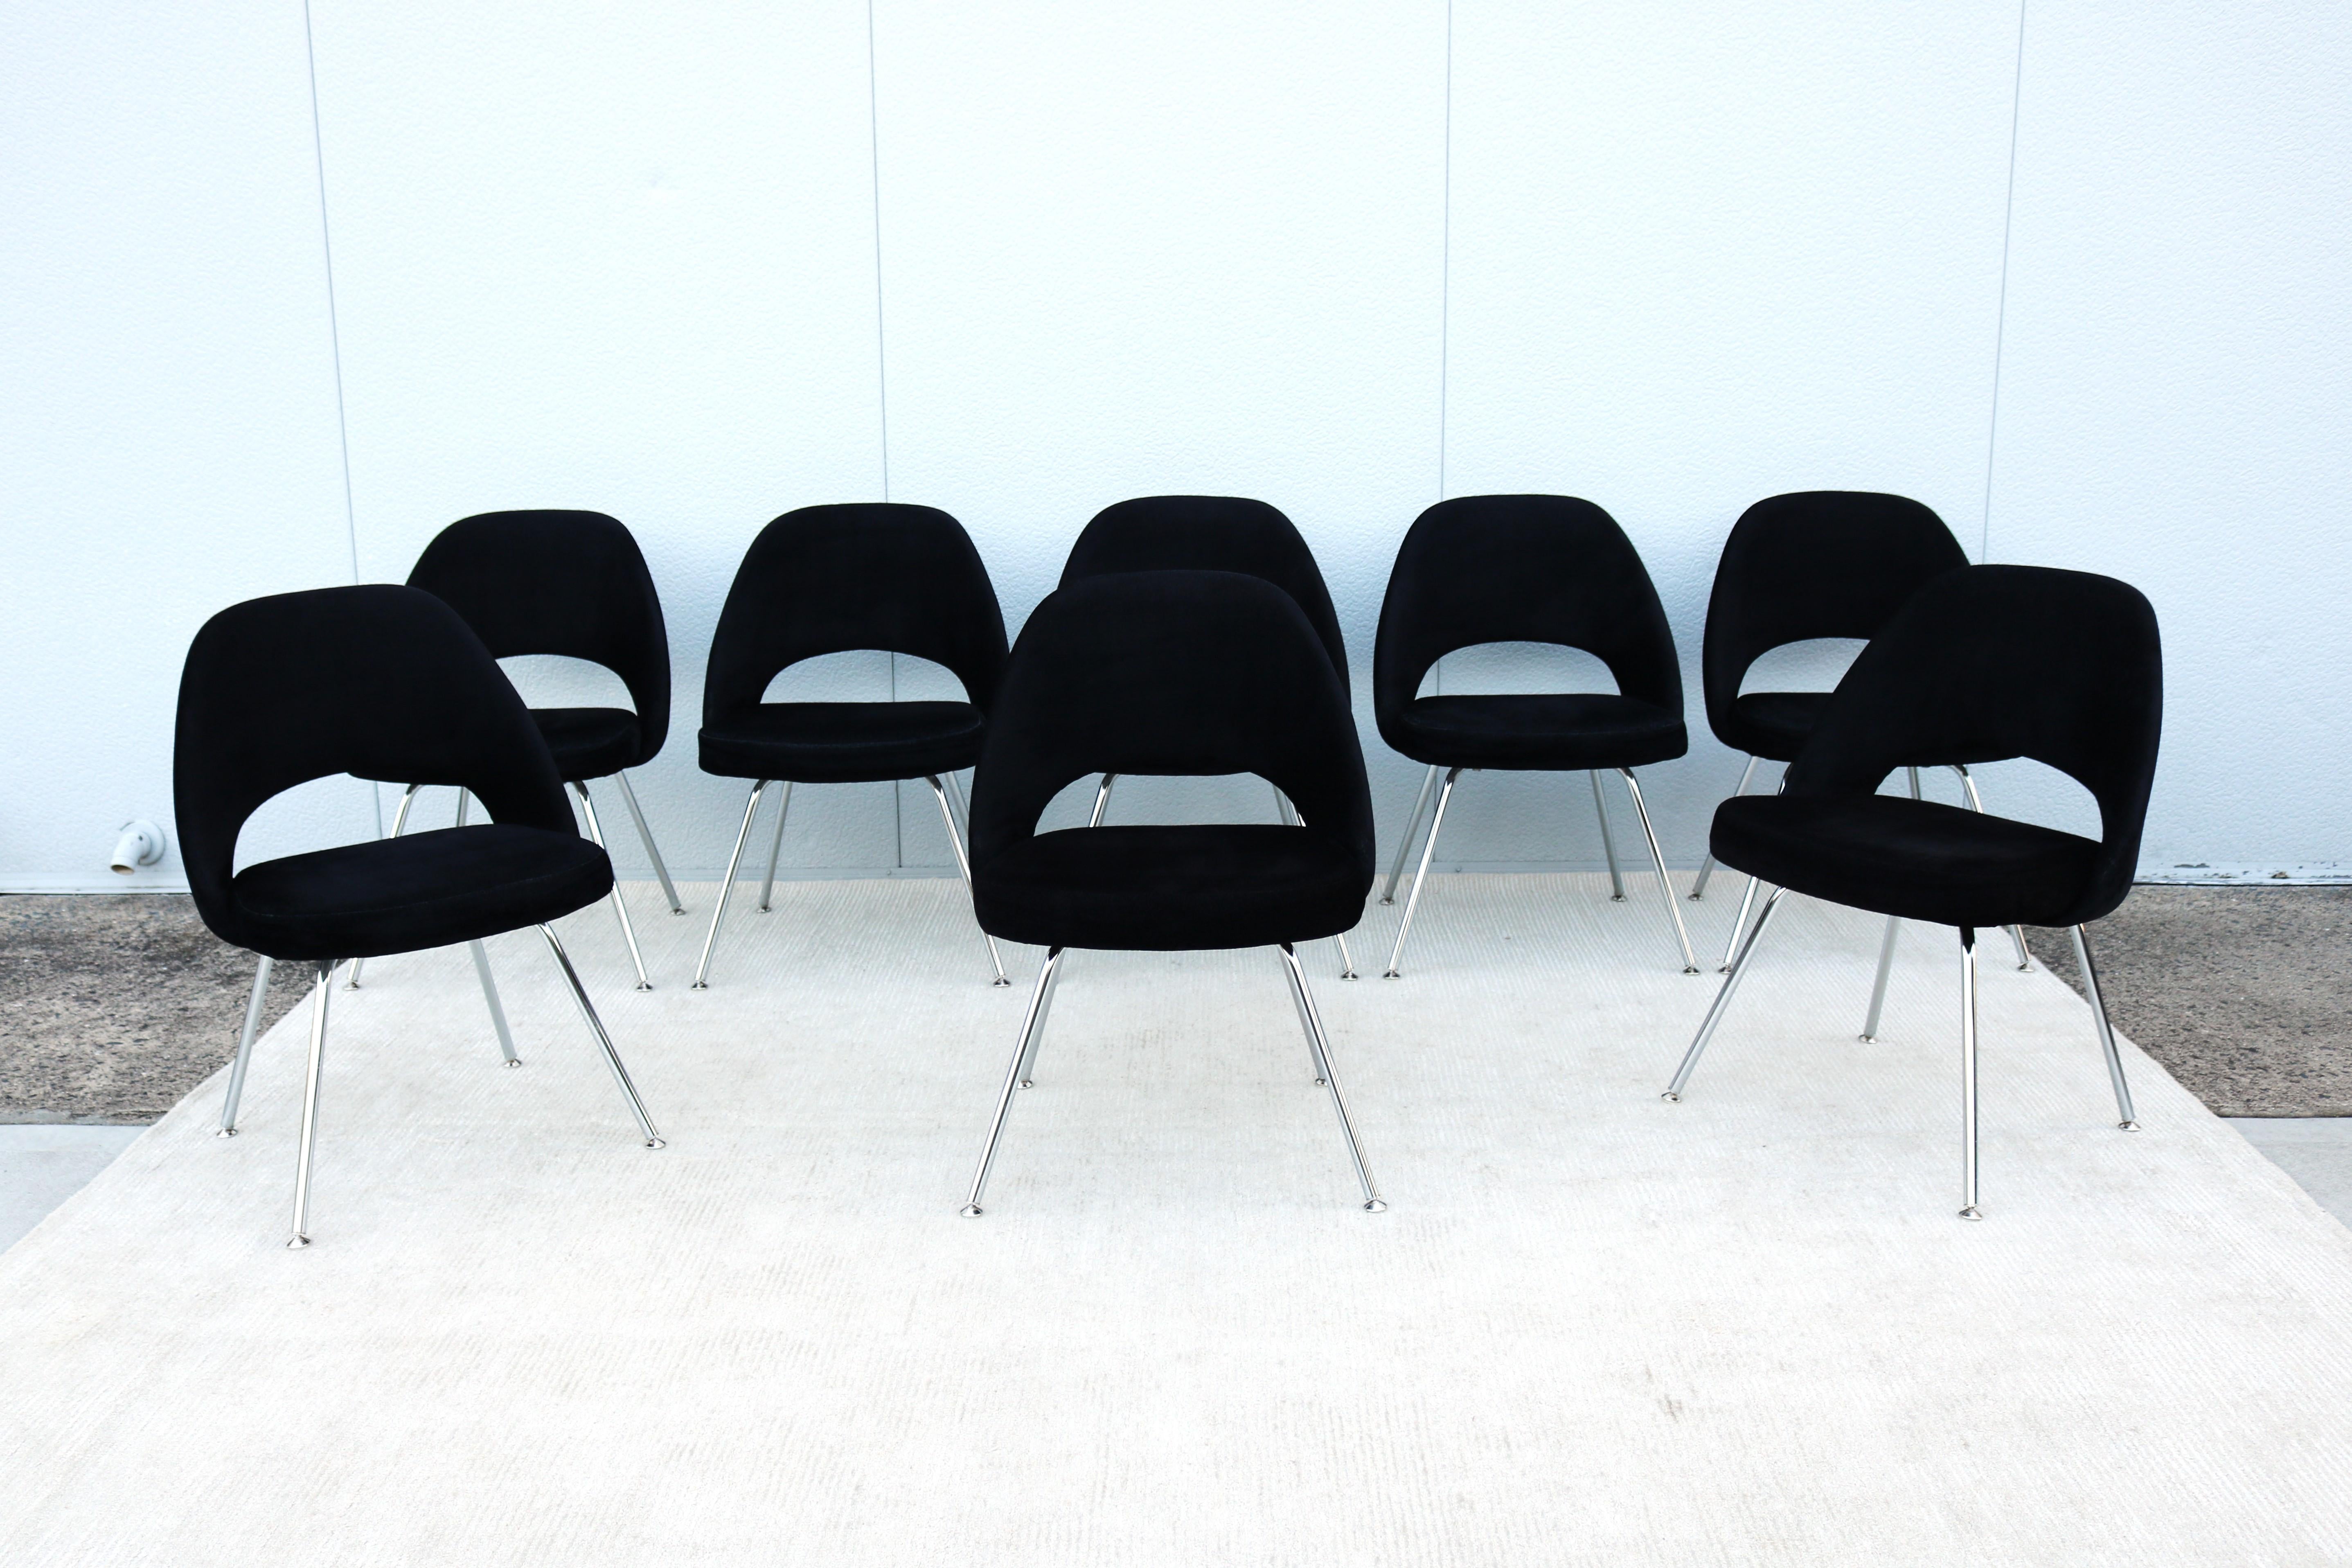 Stunning authentic mid-century modern set of eight Saarinen executive armless chairs by Knoll.
One of Knoll's most popular designs that achieved supreme comfort through the shape of its shell.
It was introduced in 1950 a midcentury modern classic of